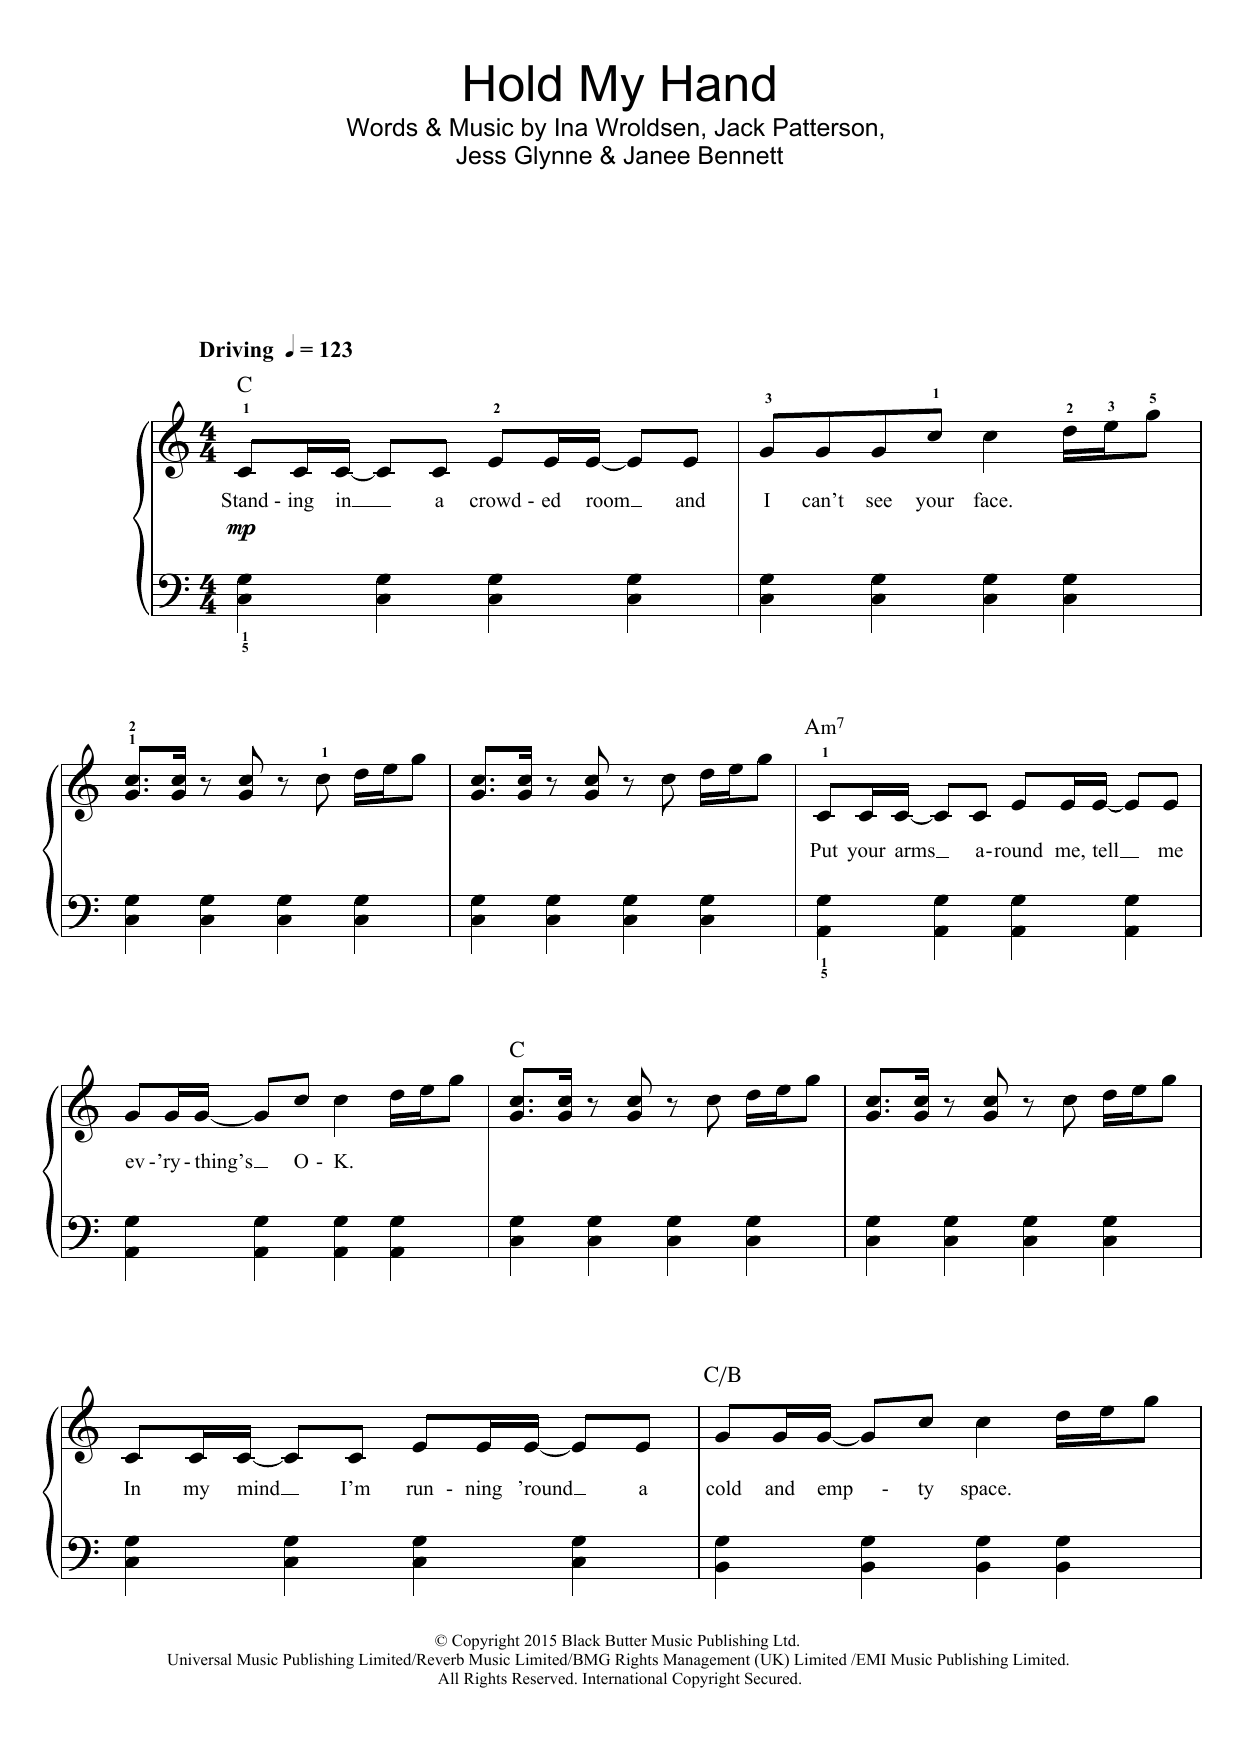 Download Jess Glynne Hold My Hand Sheet Music